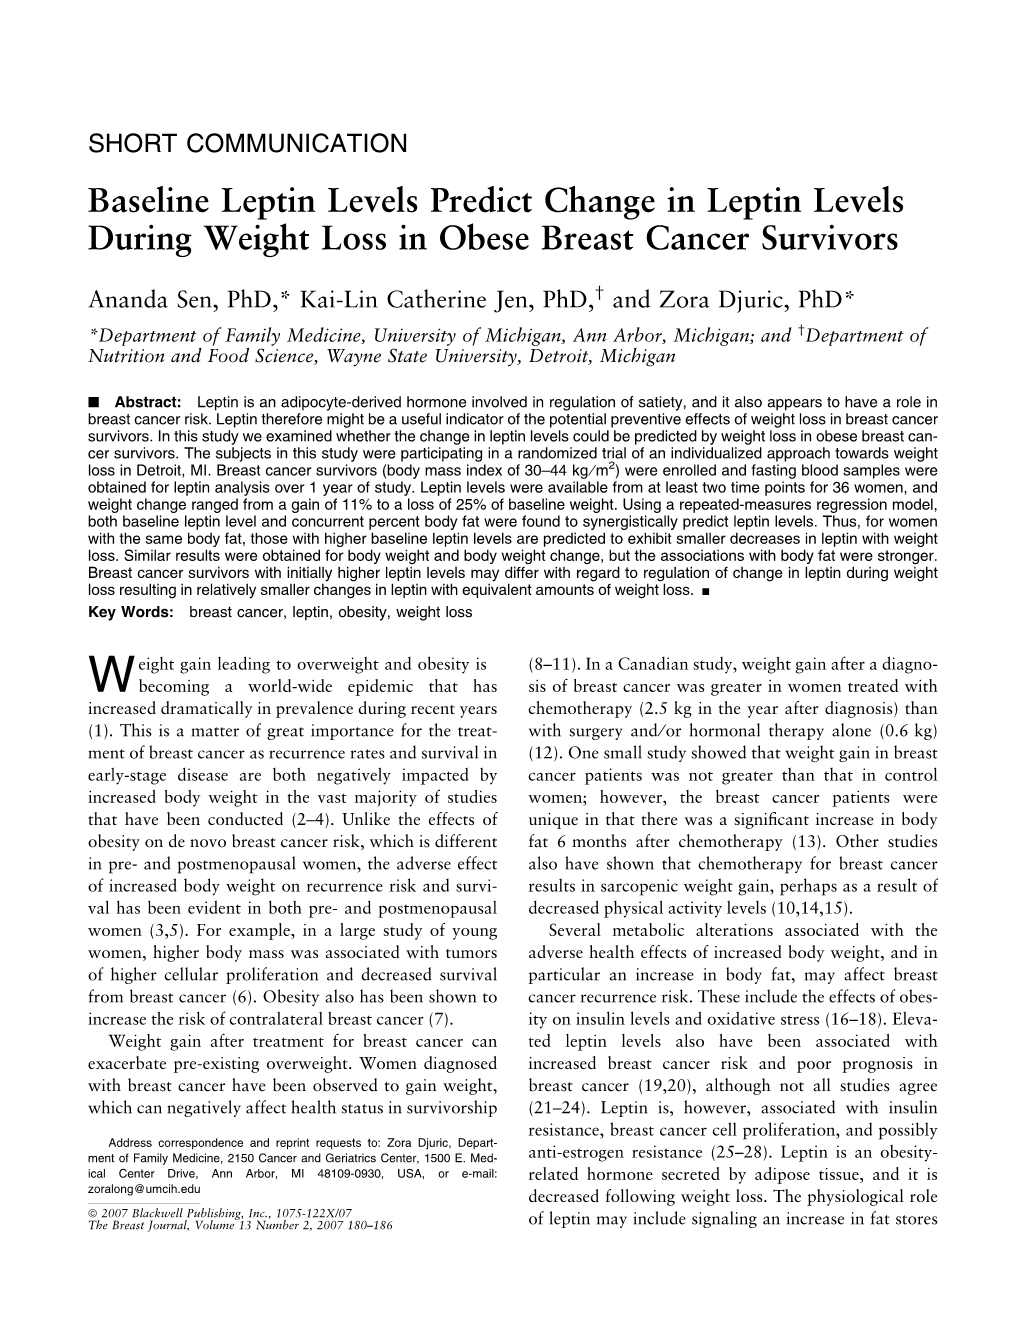 Baseline Leptin Levels Predict Change in Leptin Levels During Weight Loss in Obese Breast Cancer Survivors